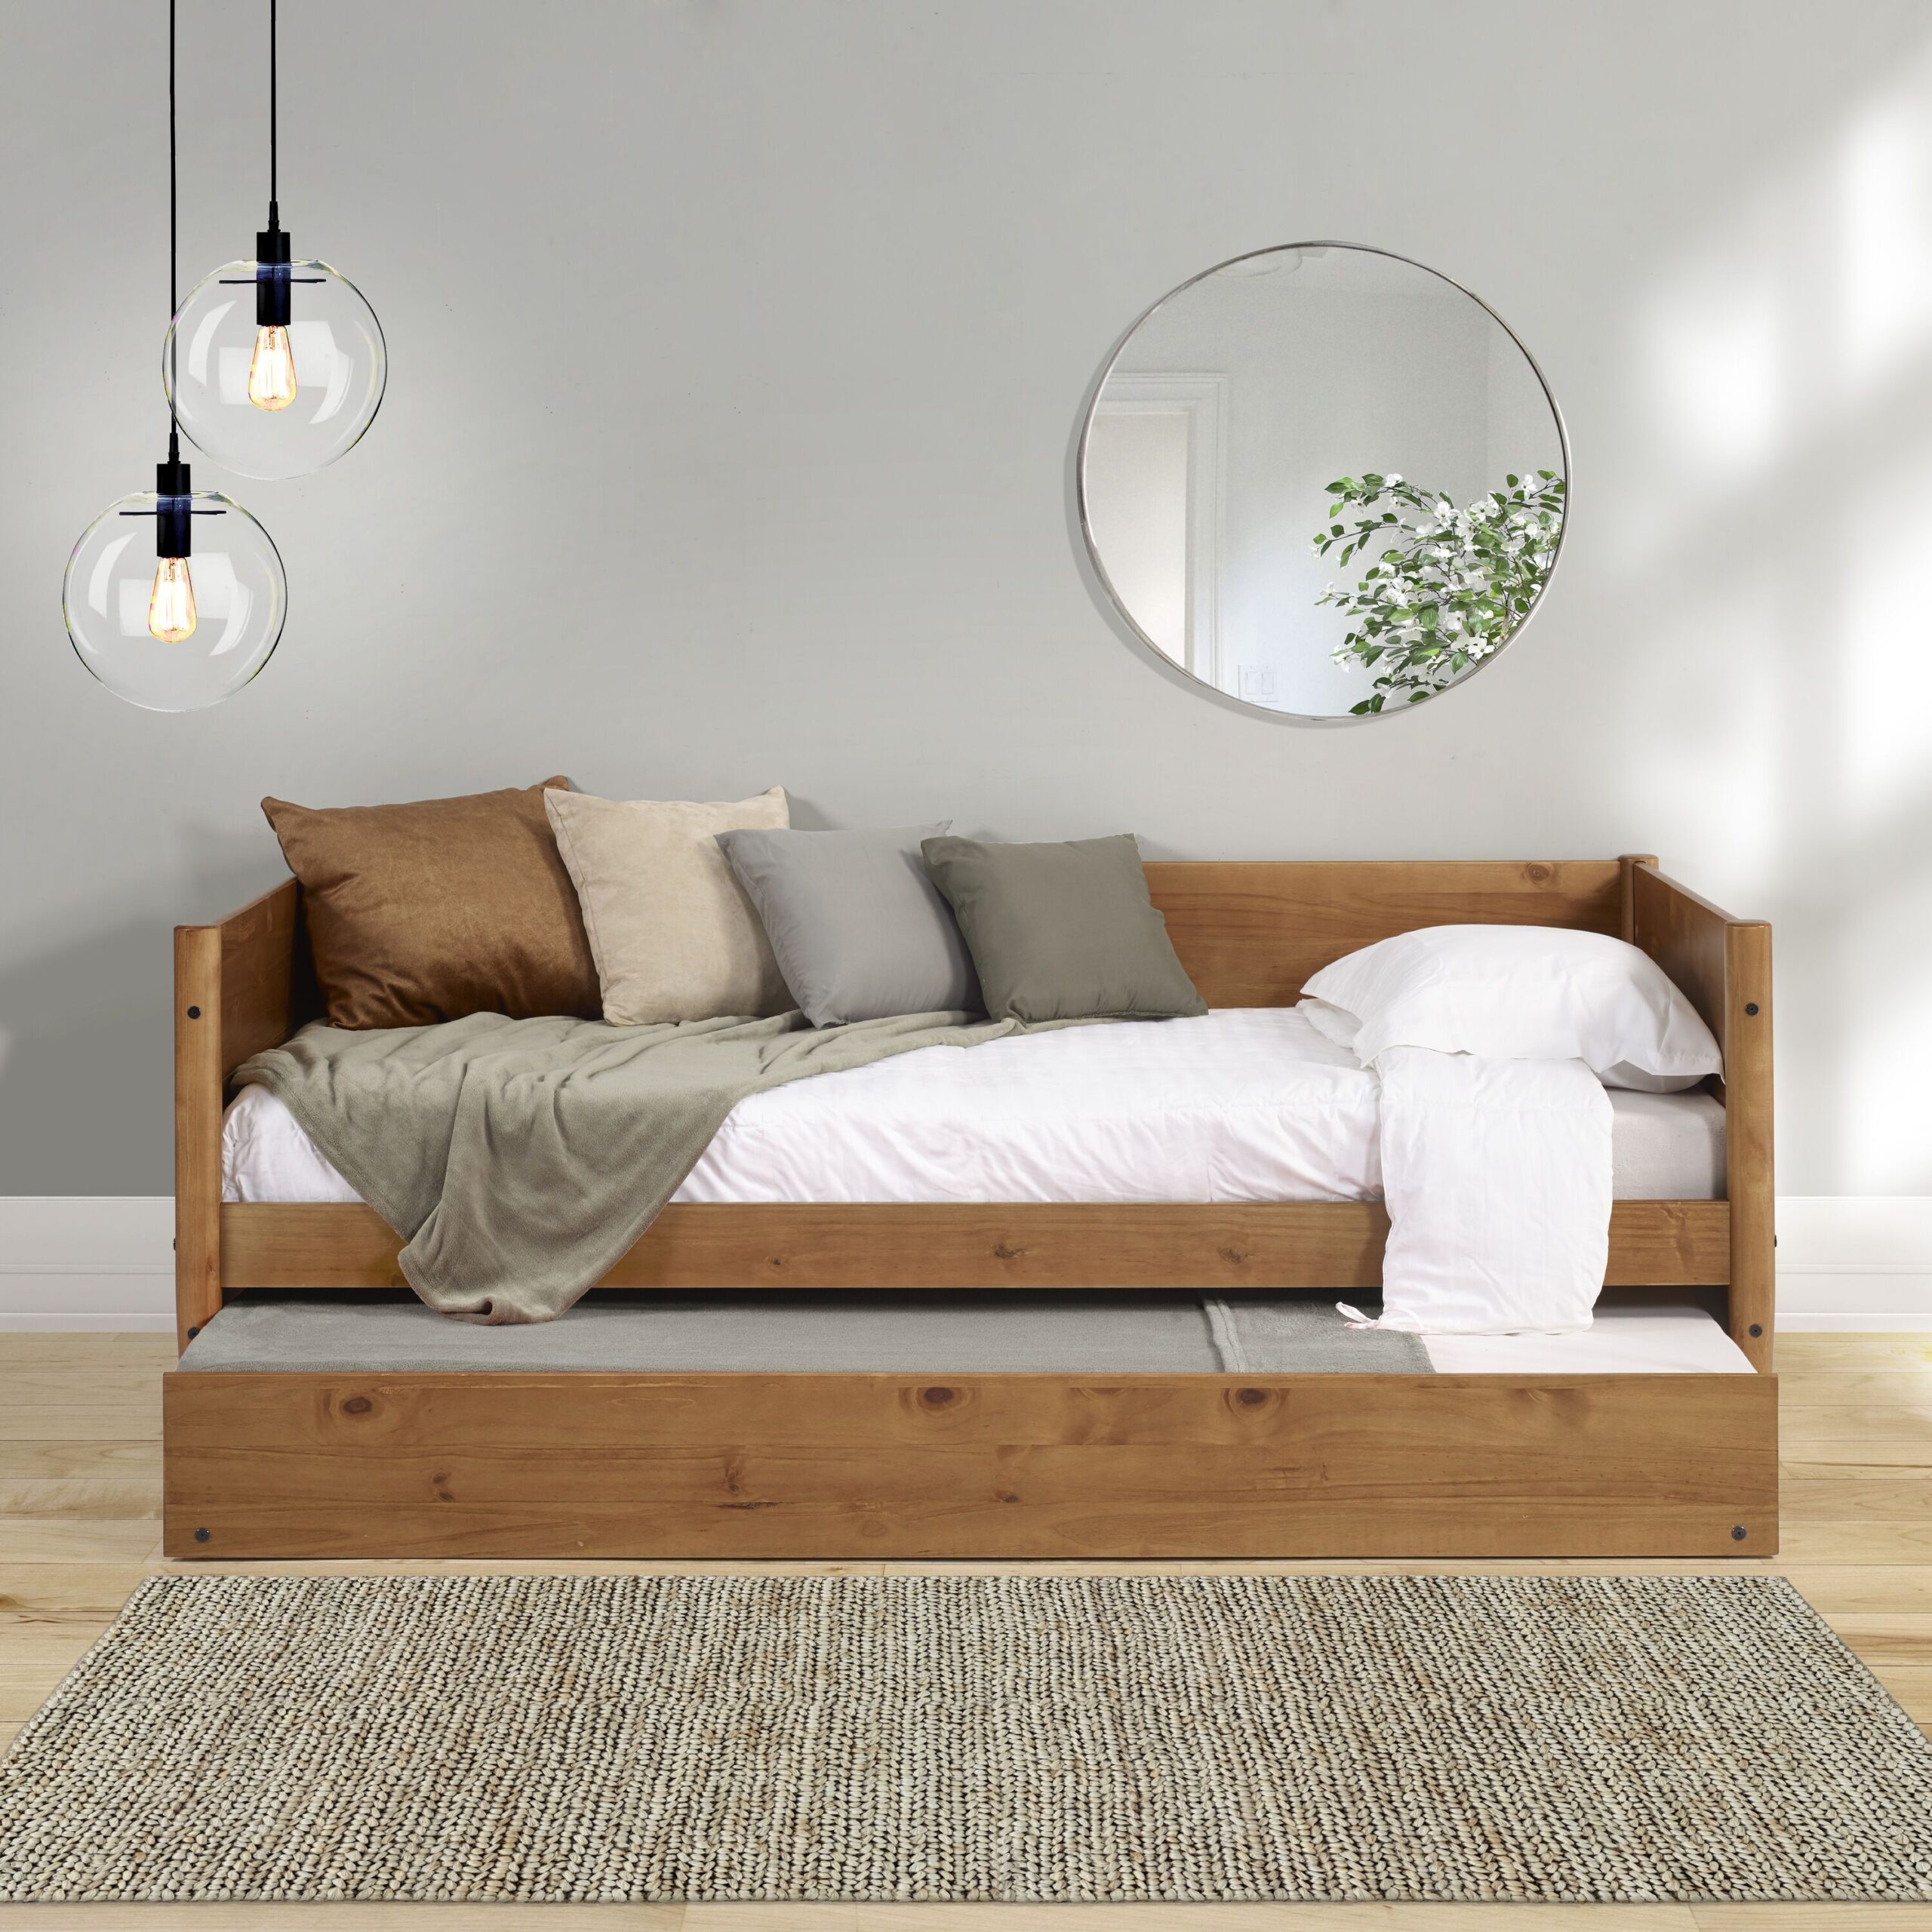 Upgrade Your Bedroom with Modern Twin Beds: Stylish and Functional Options for Adults